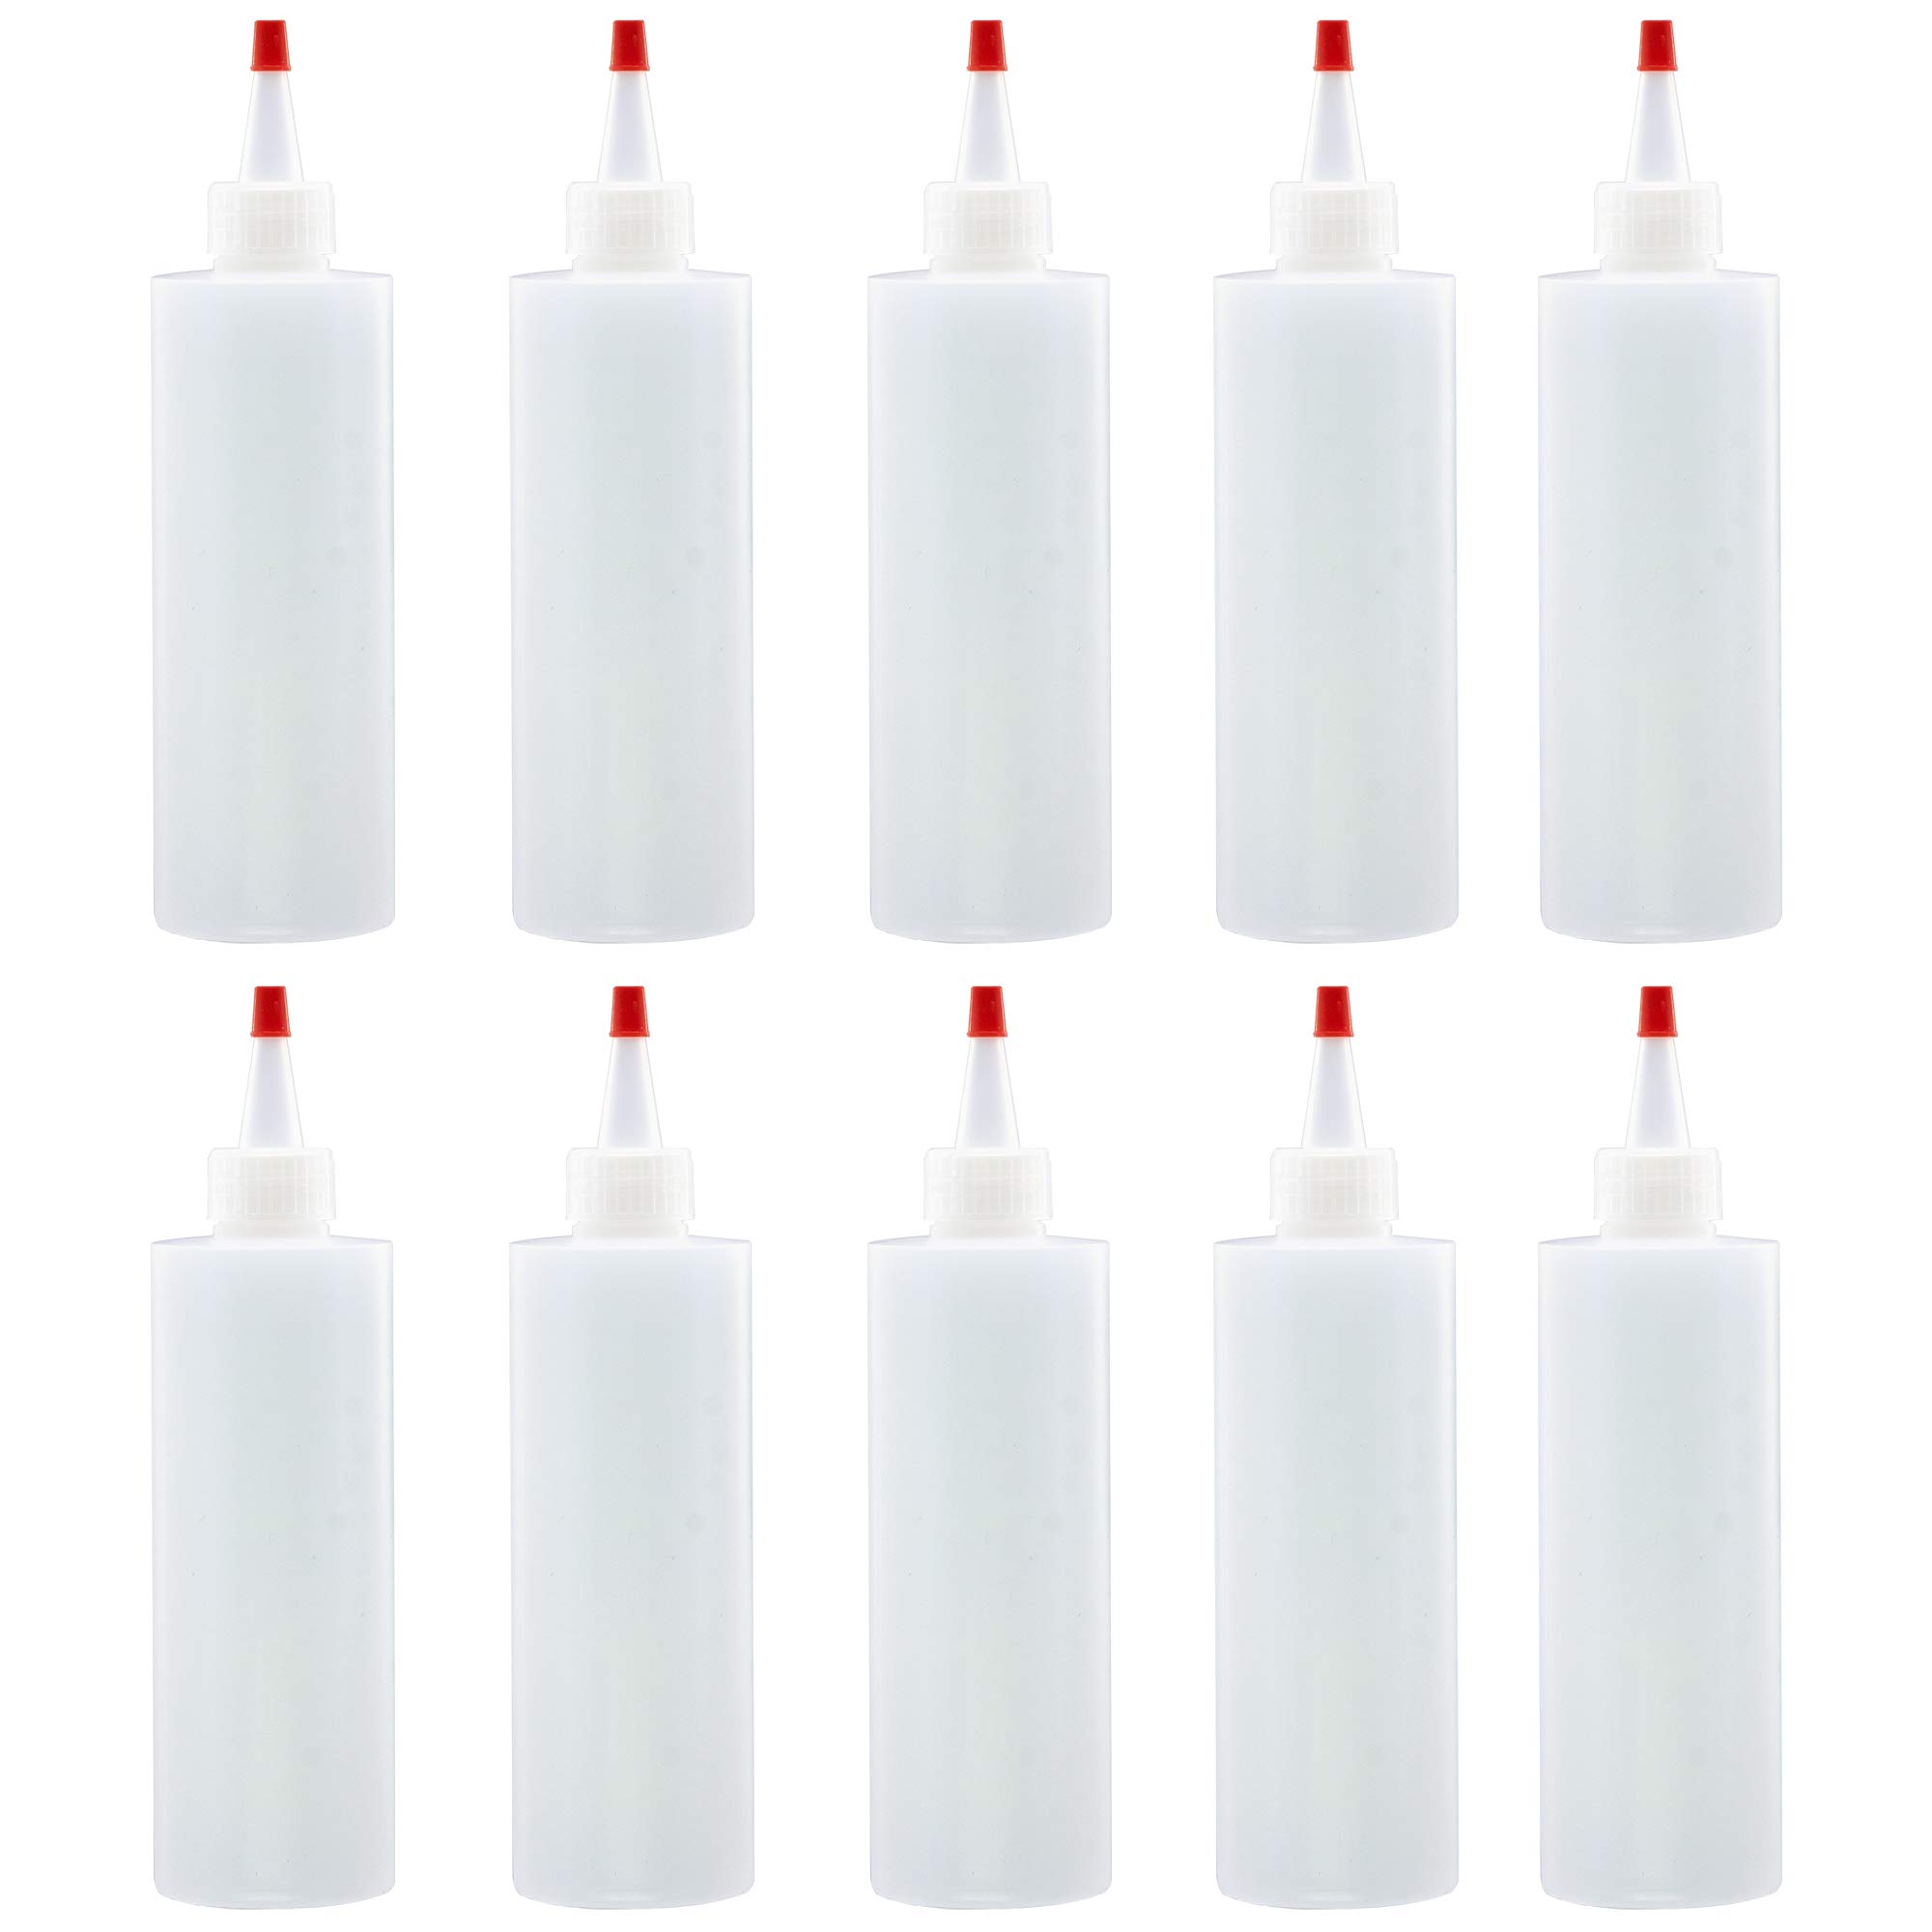 LAKESHORE TRADE 10 Pack 8-Ounce Plastic Squeeze Bottles with Red Tip Caps for Food, Crafts, Art, Multi Purpose